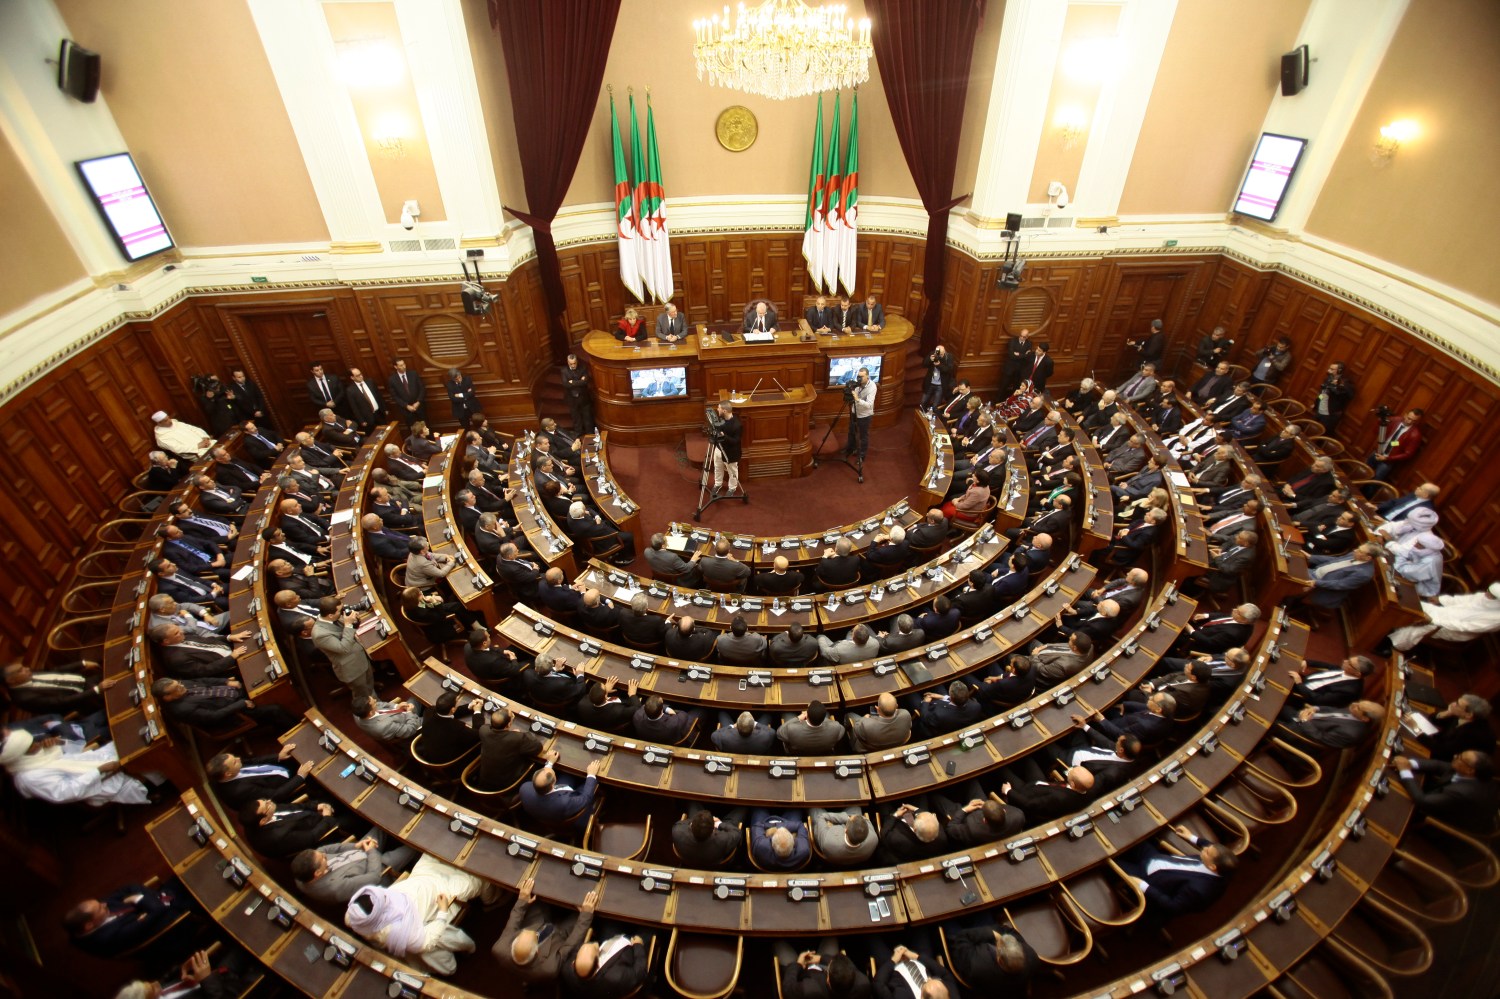 A general view of the upper parliament chamber is pictured in Algiers, Algeria February 2, 2016. Algerias parliament will vote on February 7, 2016 for the new constitution that could be President Abdelaziz Bouteflikas final farewell stage after consolidating power and removing the army from political sphere. Picture taken February 2, 2016. REUTERS/Ramzi Boudina - RTX25TC1